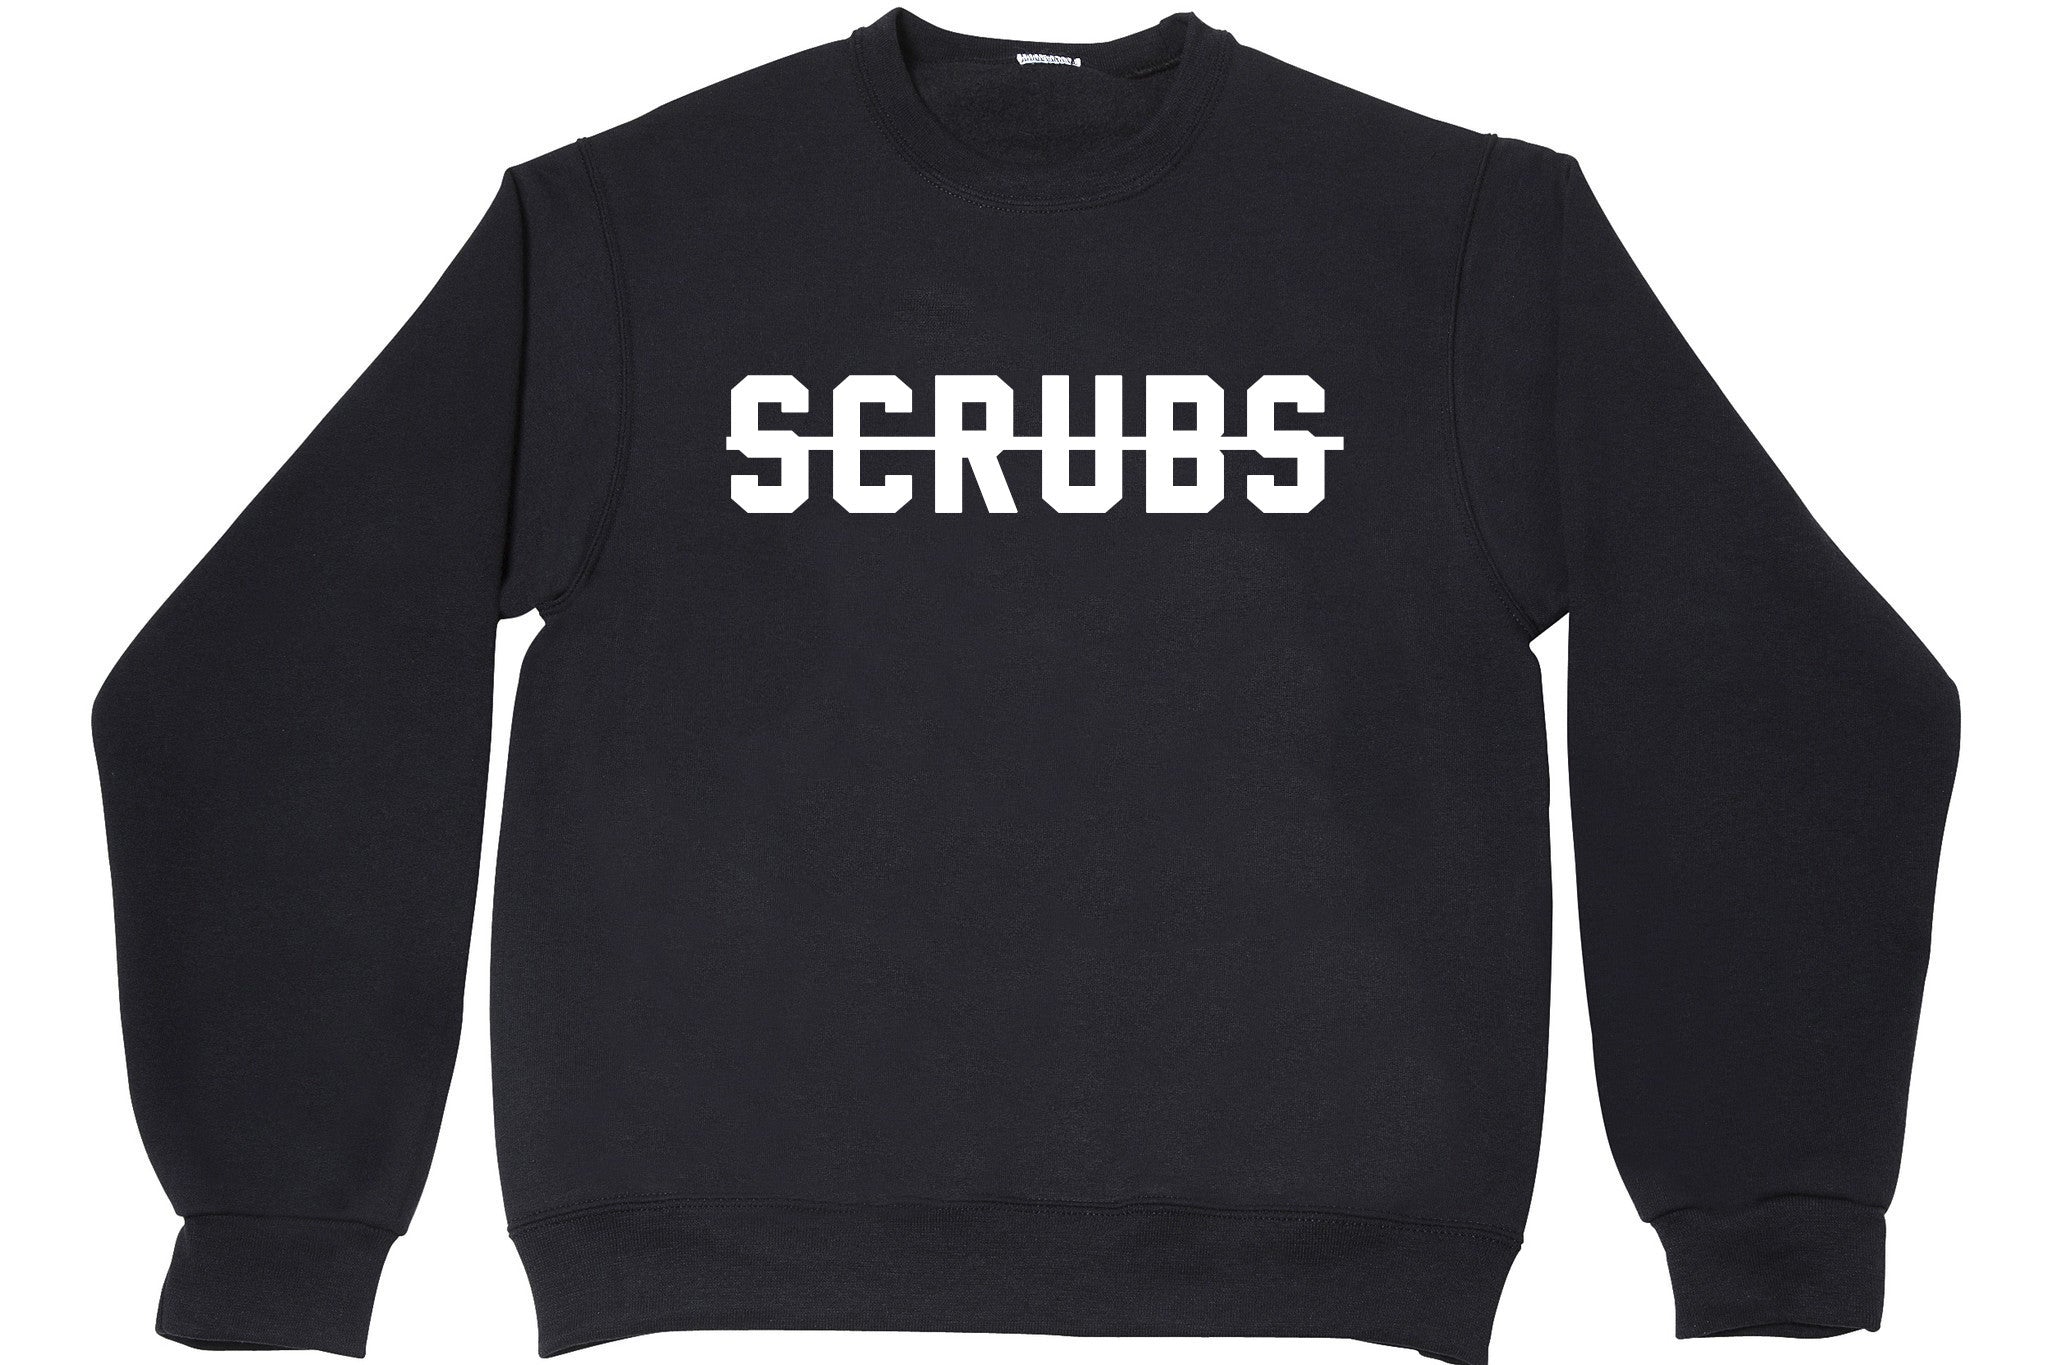 SCRUBS [CROSSED OUT]